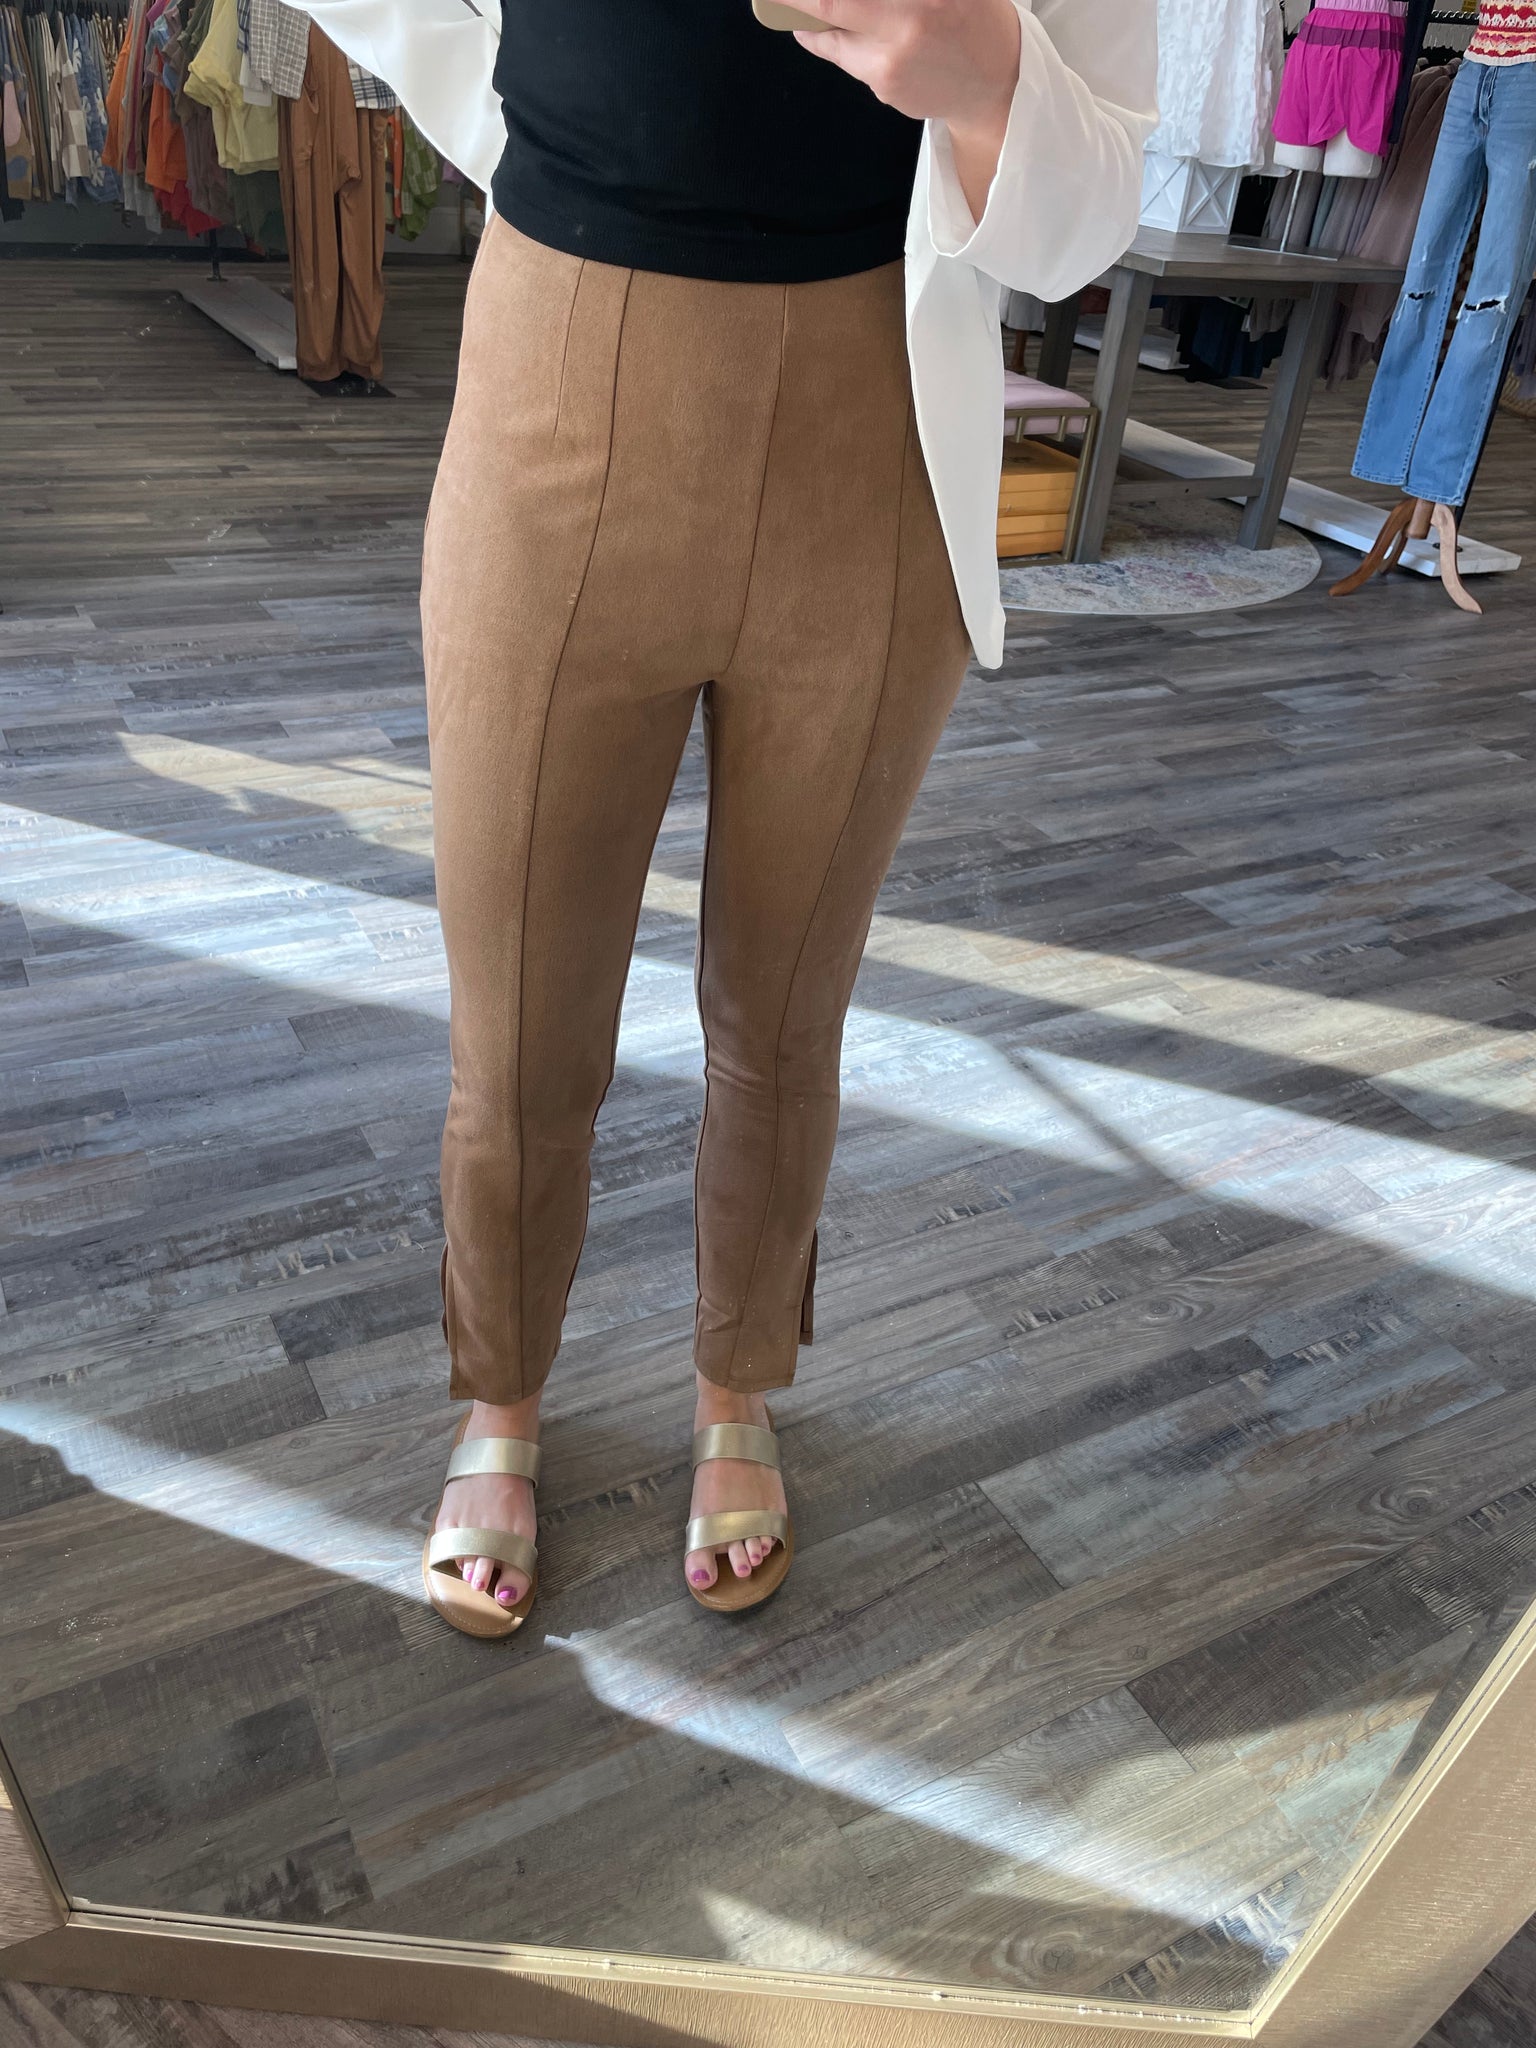 Stepping into fall with style in these camel faux suede pants. 🍂✨ #suede  #suedepants #fallfashion #fallstyles #suedestyle #newpant